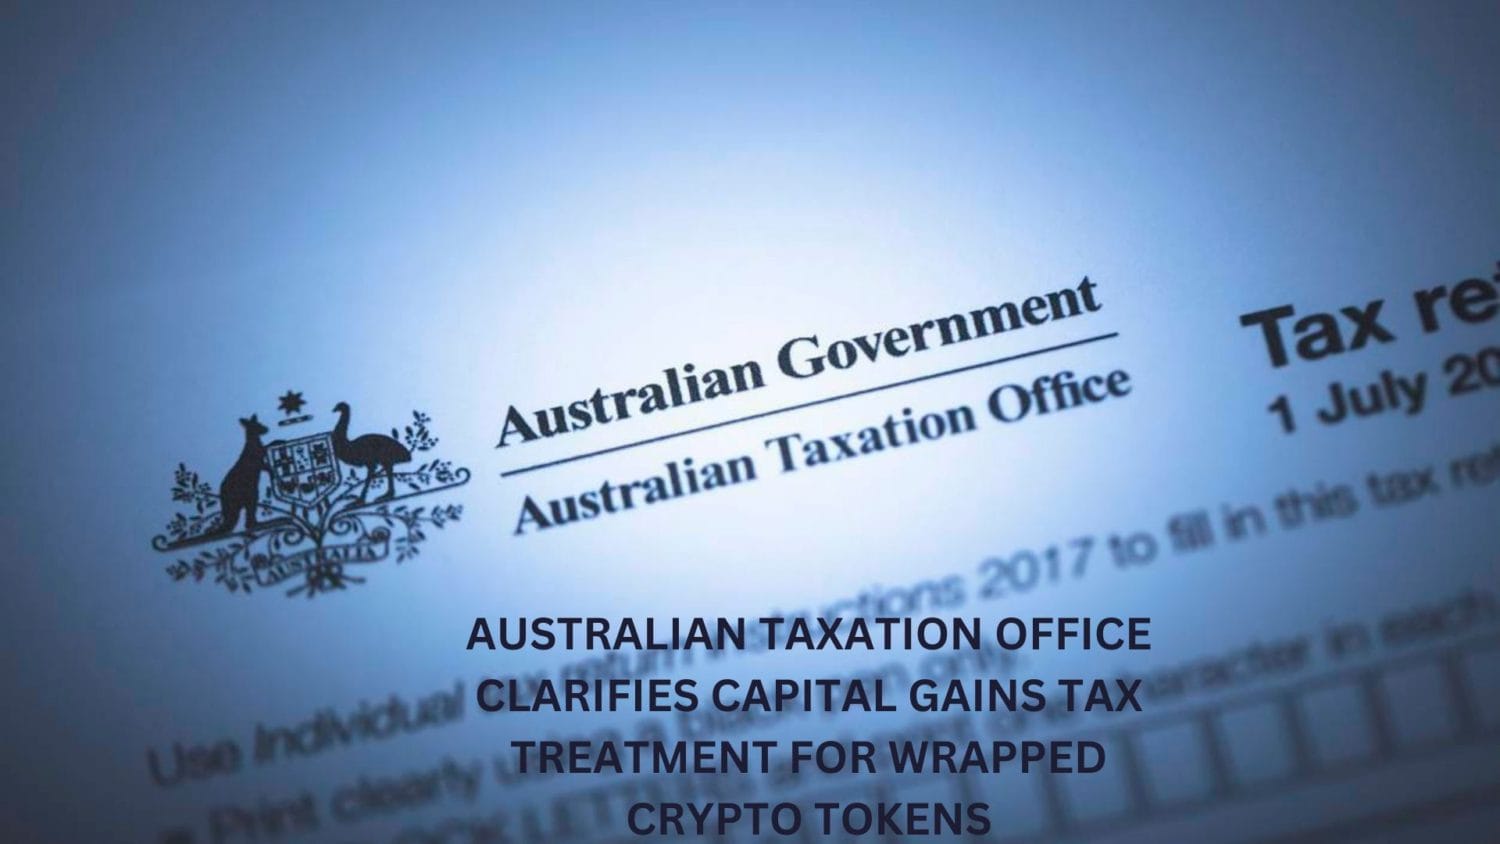 Australian Taxation Office Clarifies Capital Gains Tax Treatment For Wrapped Crypto Tokens